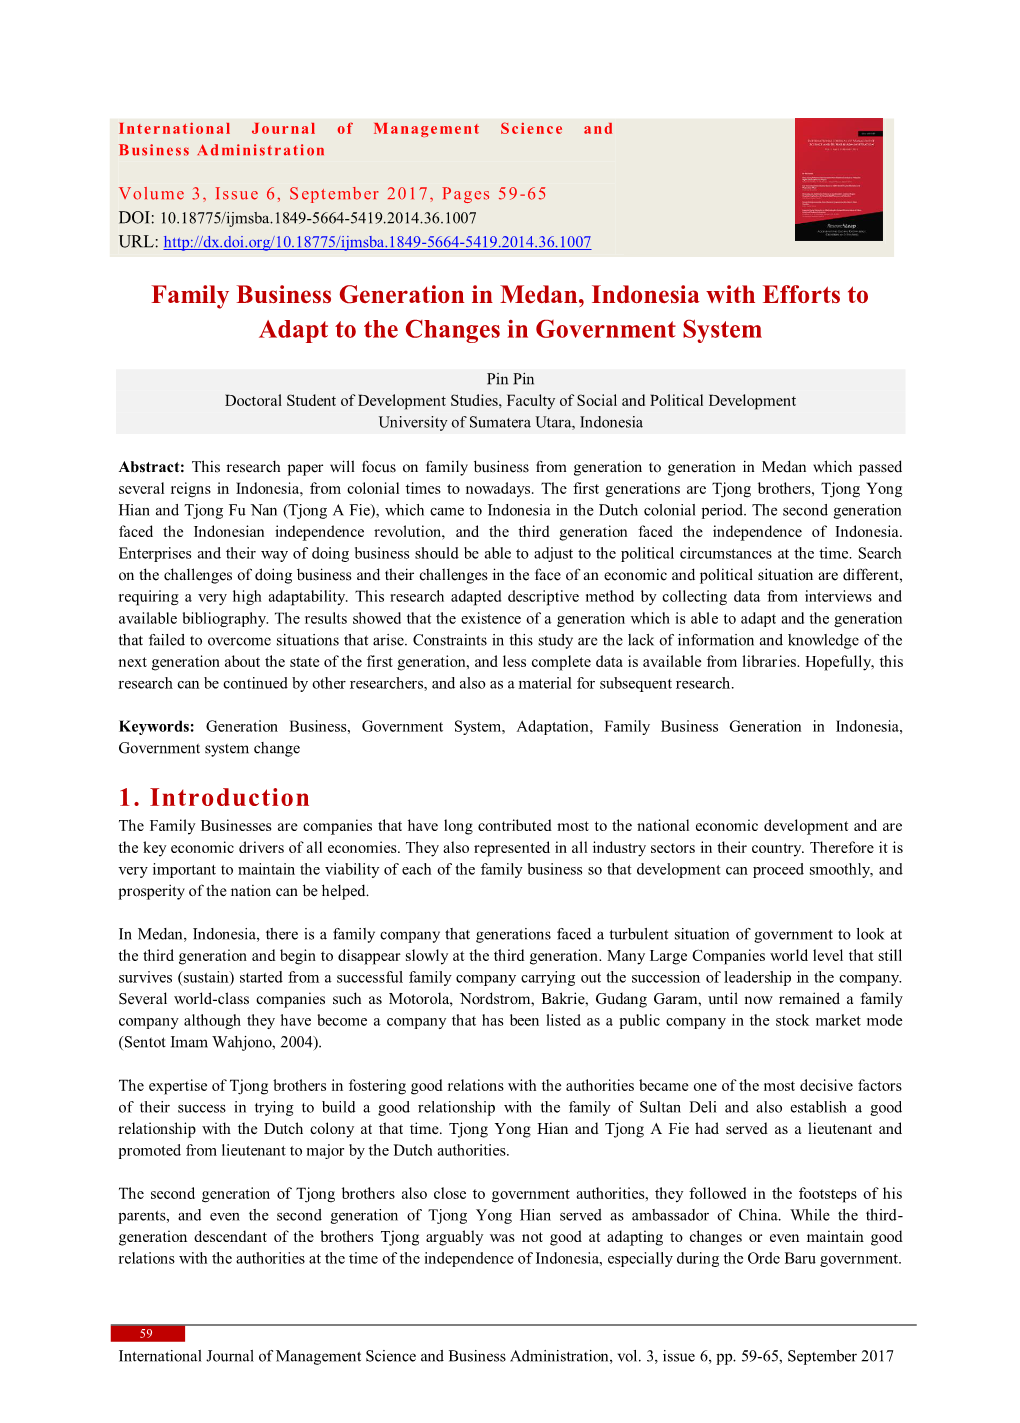 Family Business Generation in Medan, Indonesia with Efforts to Adapt to the Changes in Government System